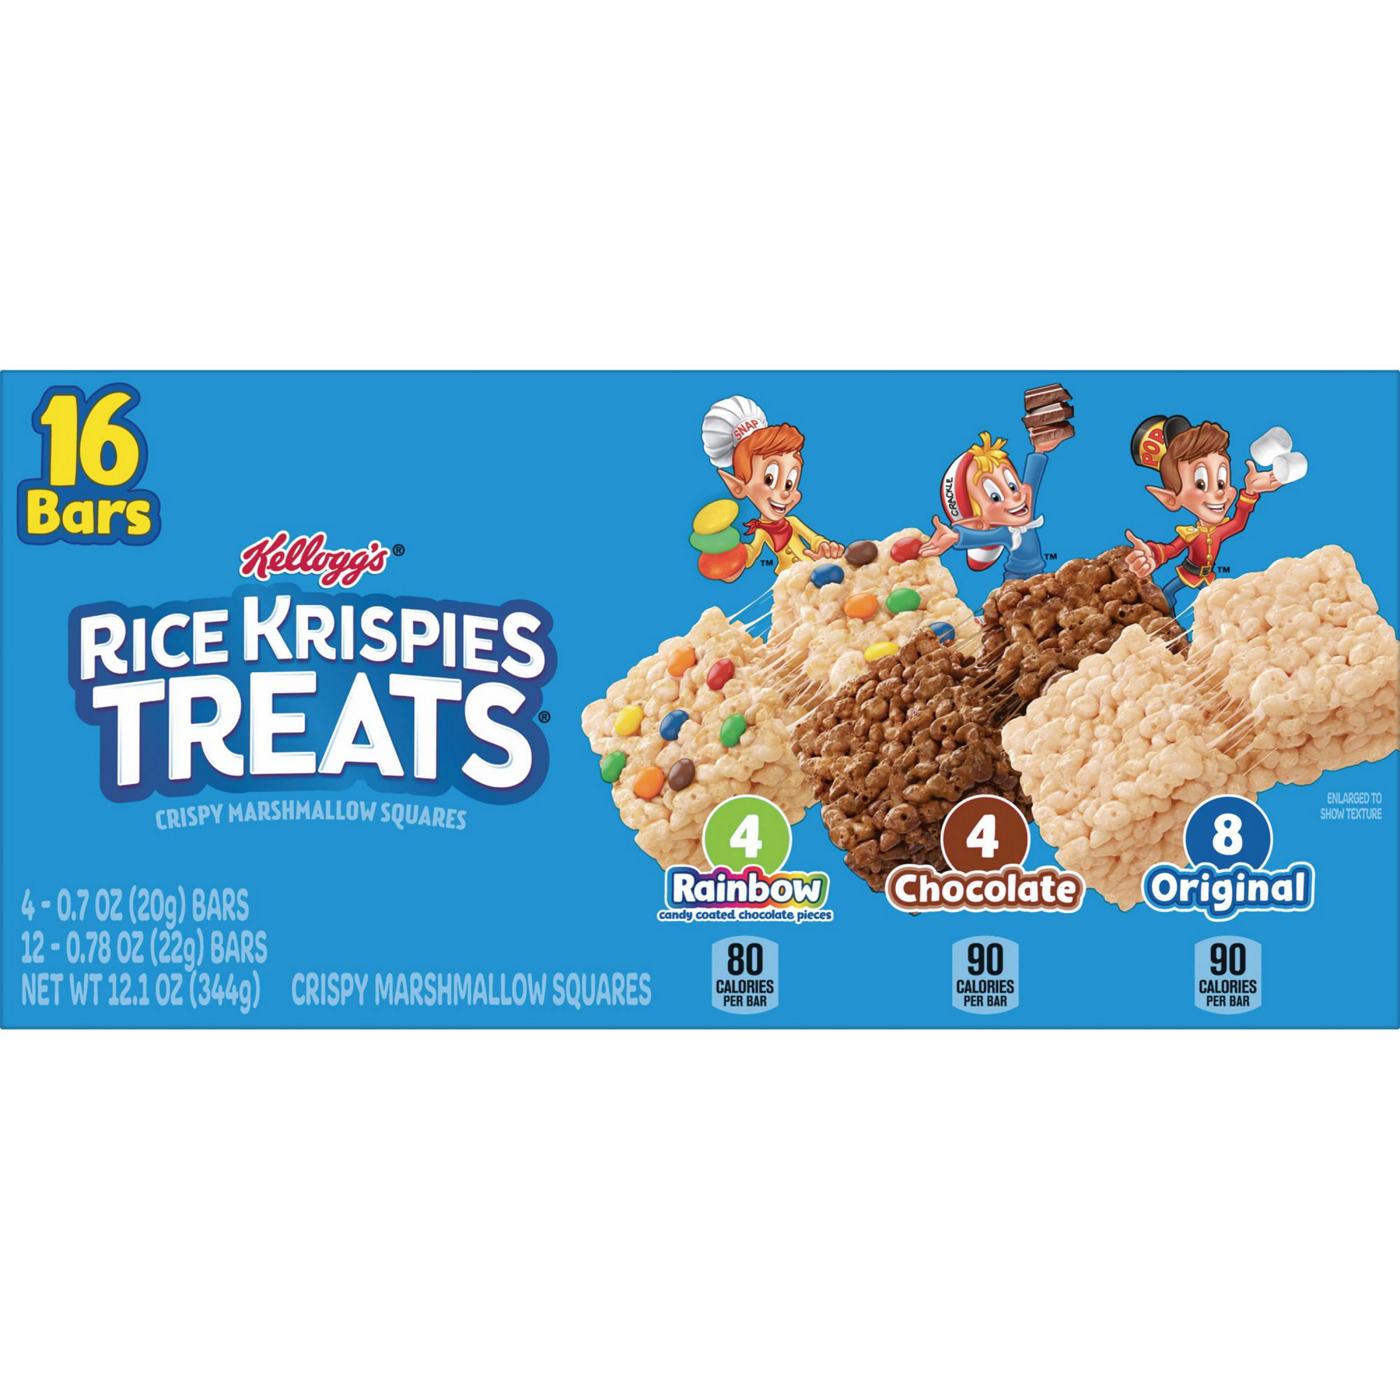 Rice Krispies Treats Variety Pack Crispy Marshmallow Squares; image 5 of 8